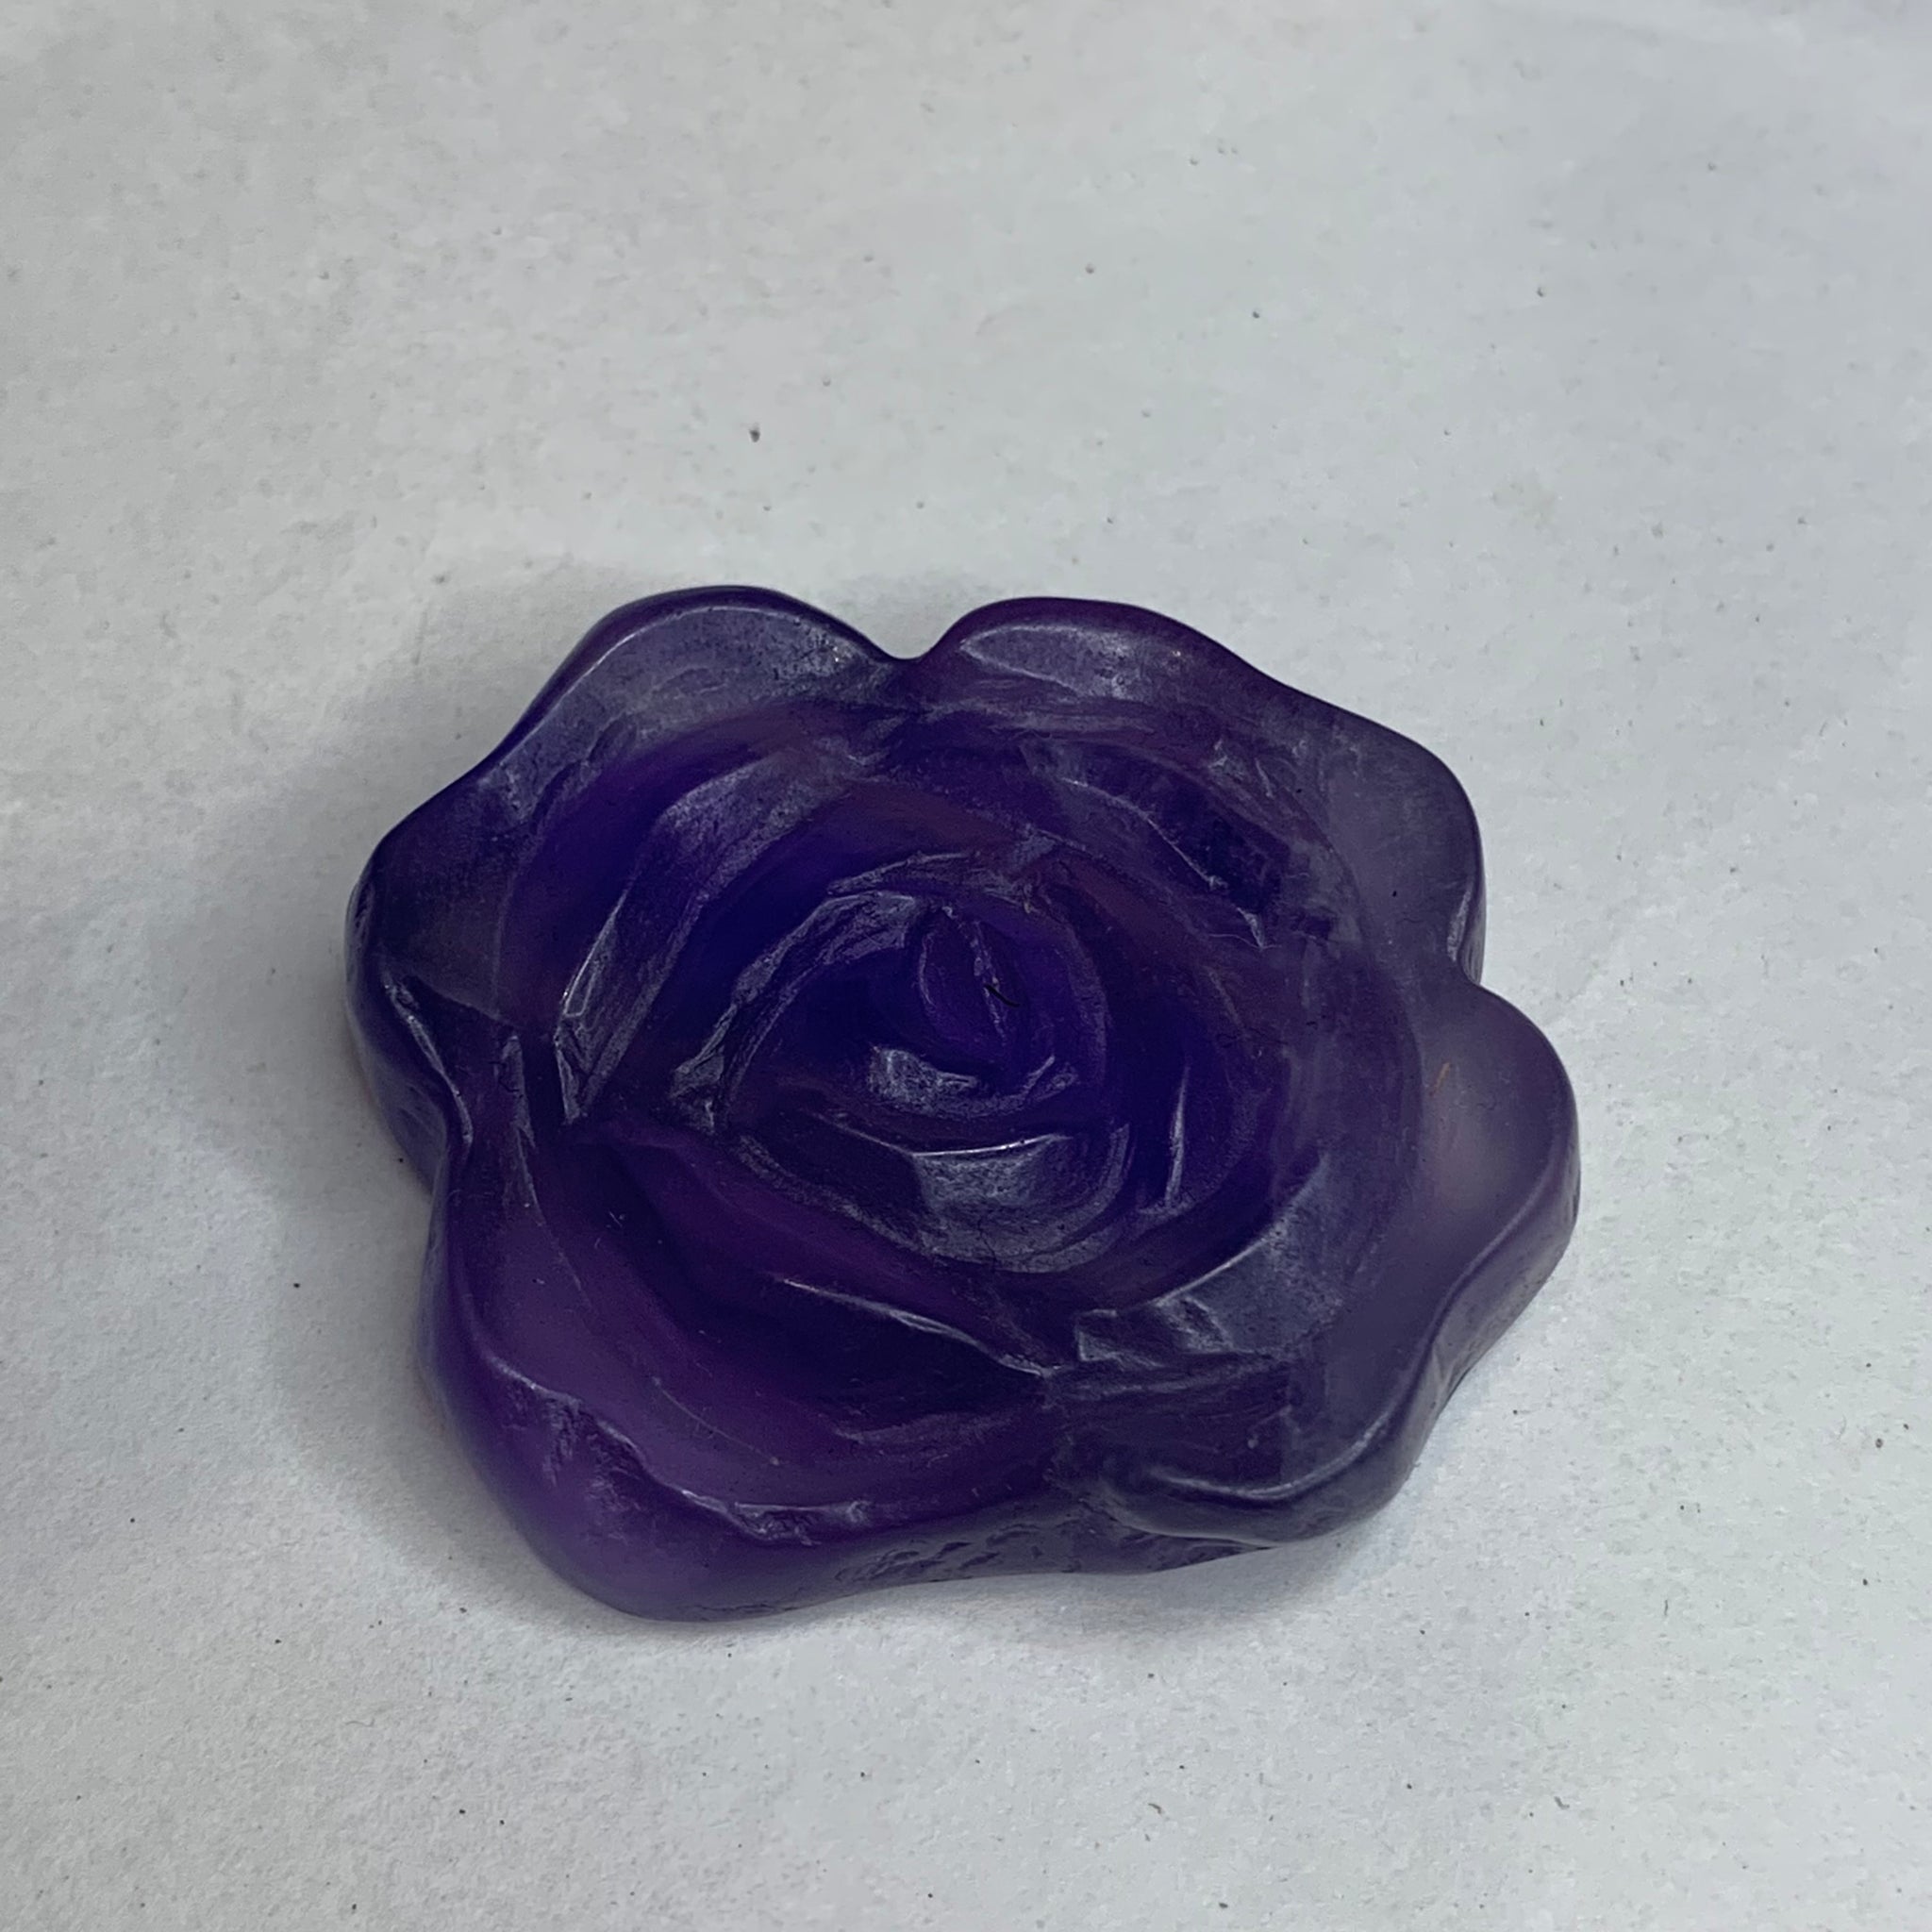 Fluorite Rose Carving 2 inches